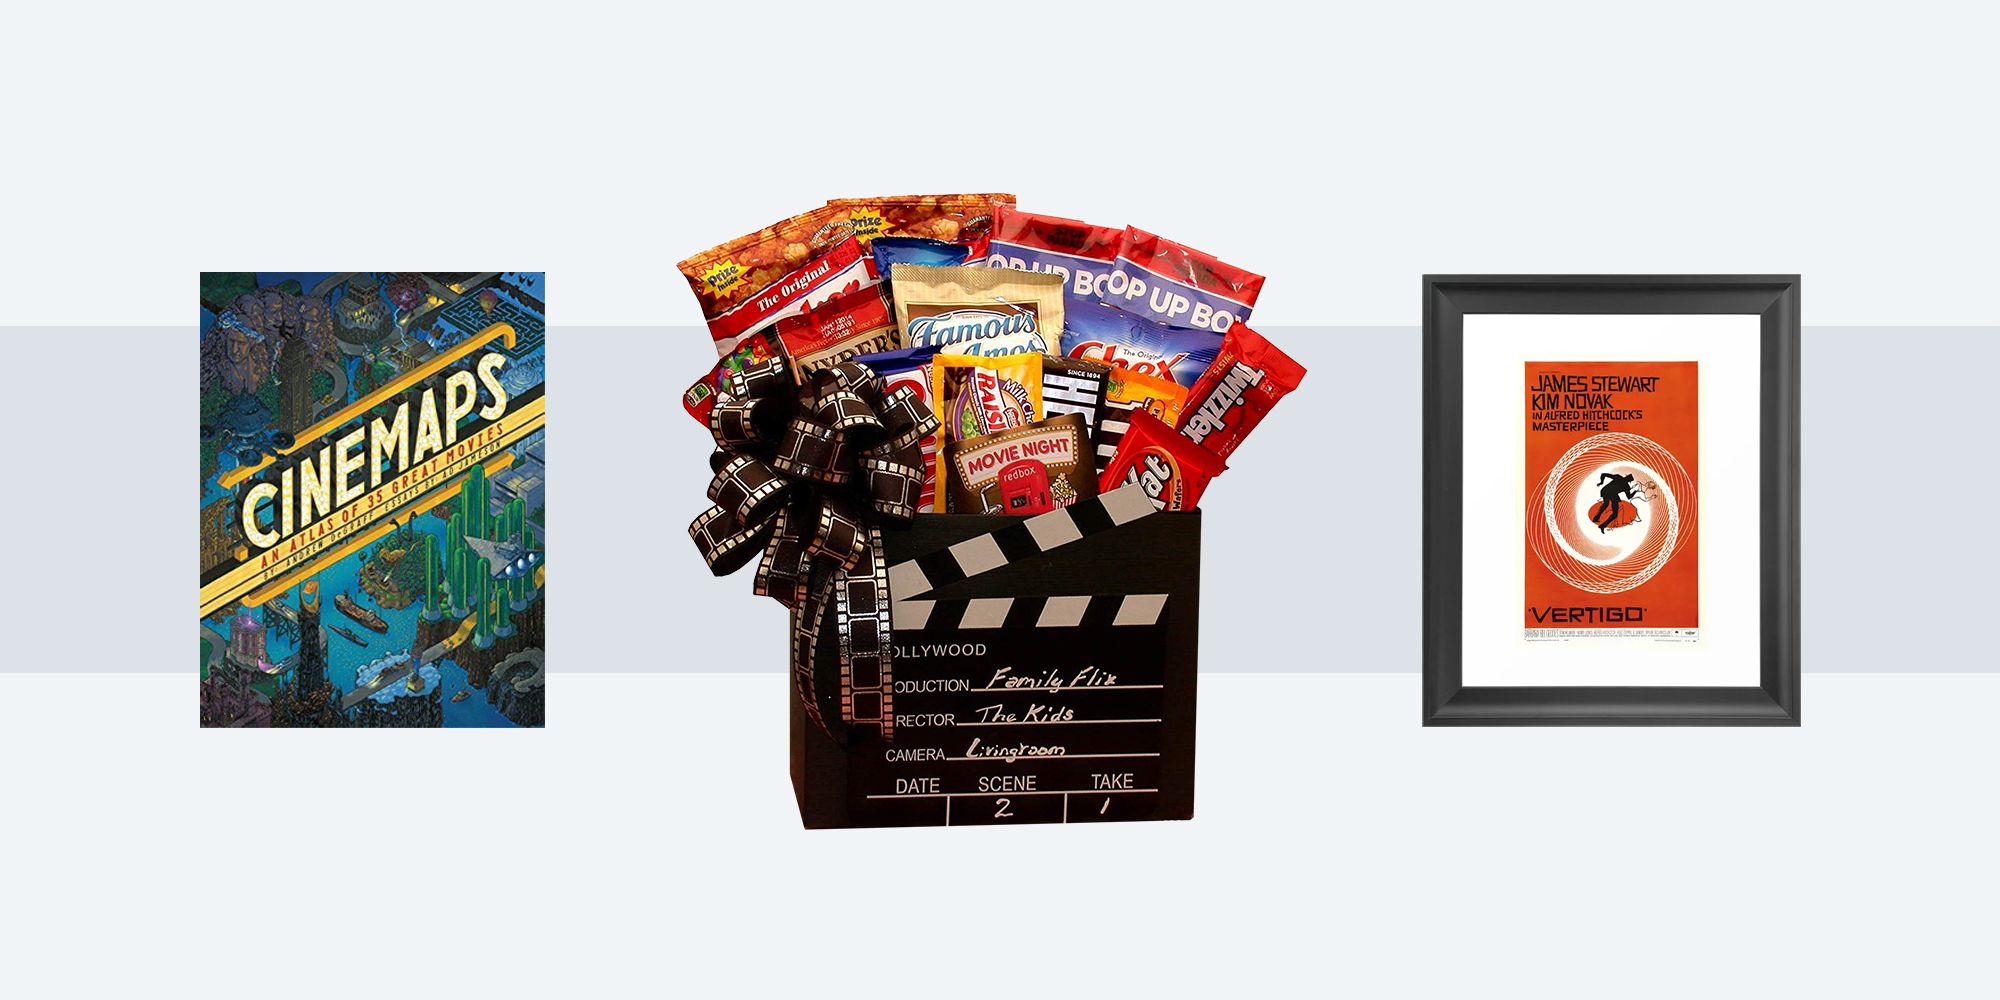 Think they've seen it all? Holiday gift ideas for the movie lover who wants  more